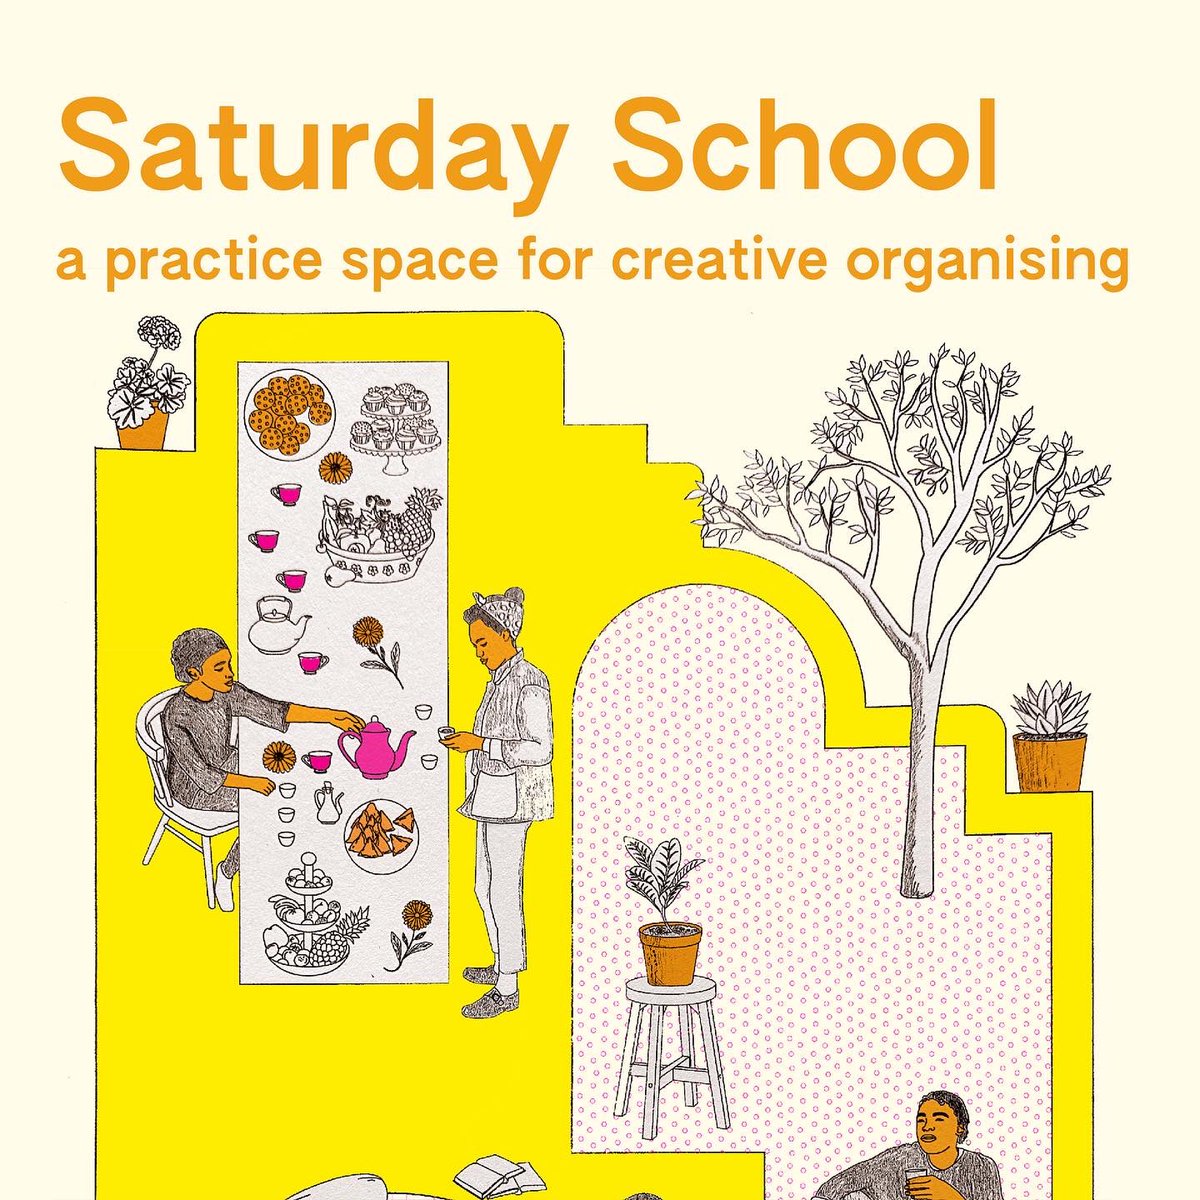 Join us for Saturday School, a practice space for creative organising! Together we’ll explore #embodiedleadership #sciencefictionwriting #designjustice: strategic practices that support us to embody, imagine & design for border abolition.Apply before 12/6 migrantsinculture.com/saturdayschool